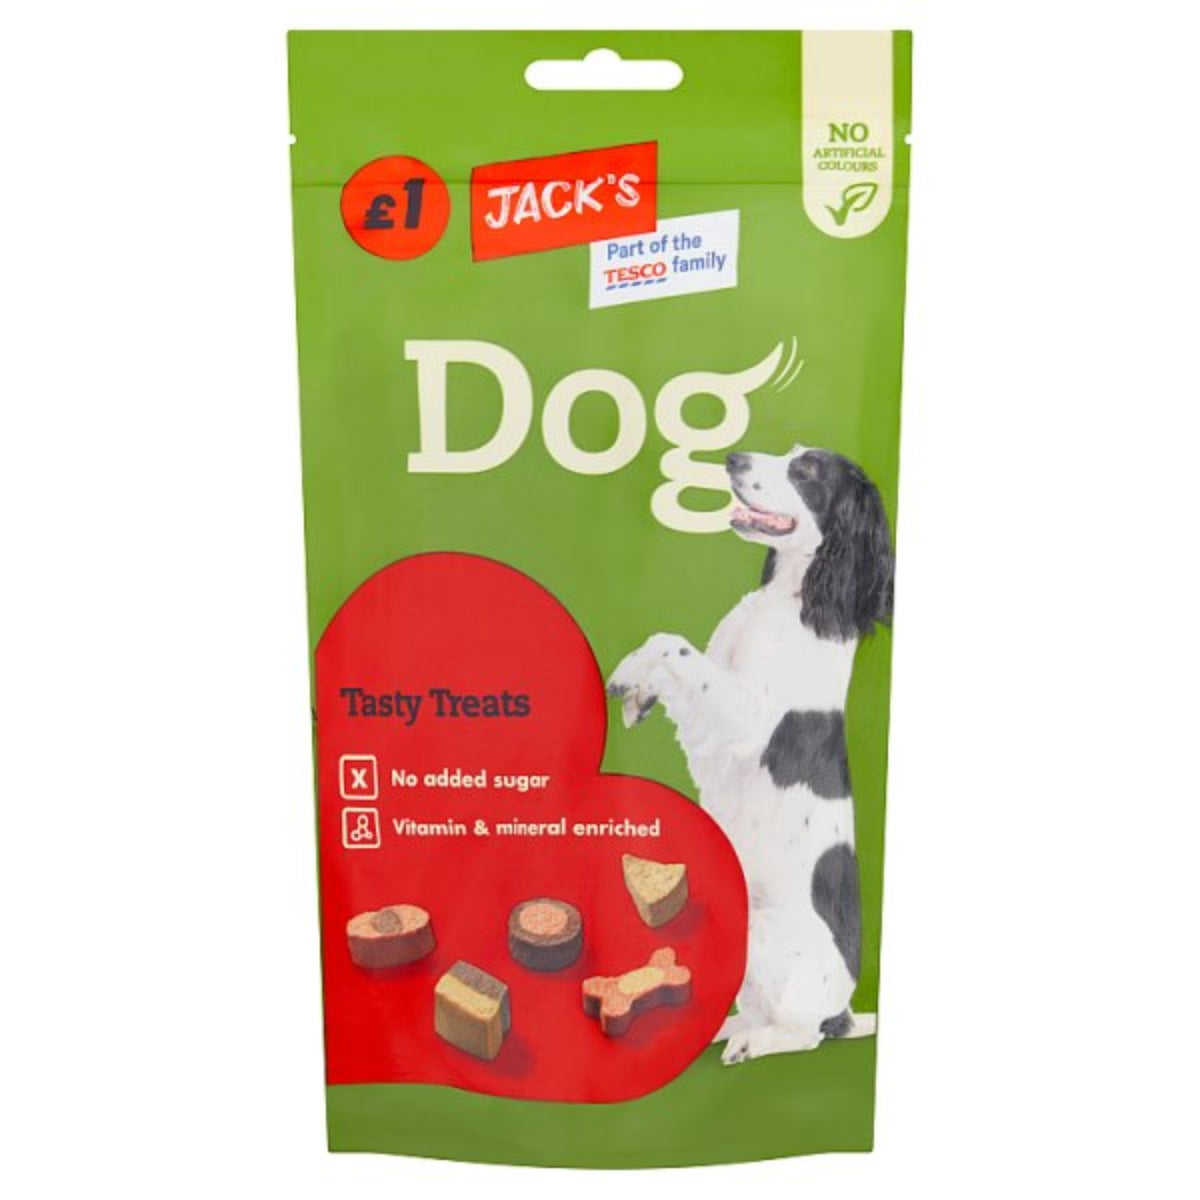 A package of Jacks - Dog Tasty Treats - 100g, featuring an image of a black and white dog and circular windows showing the treats inside, labeled "no added sugar" and "vitamin & mineral enriched.